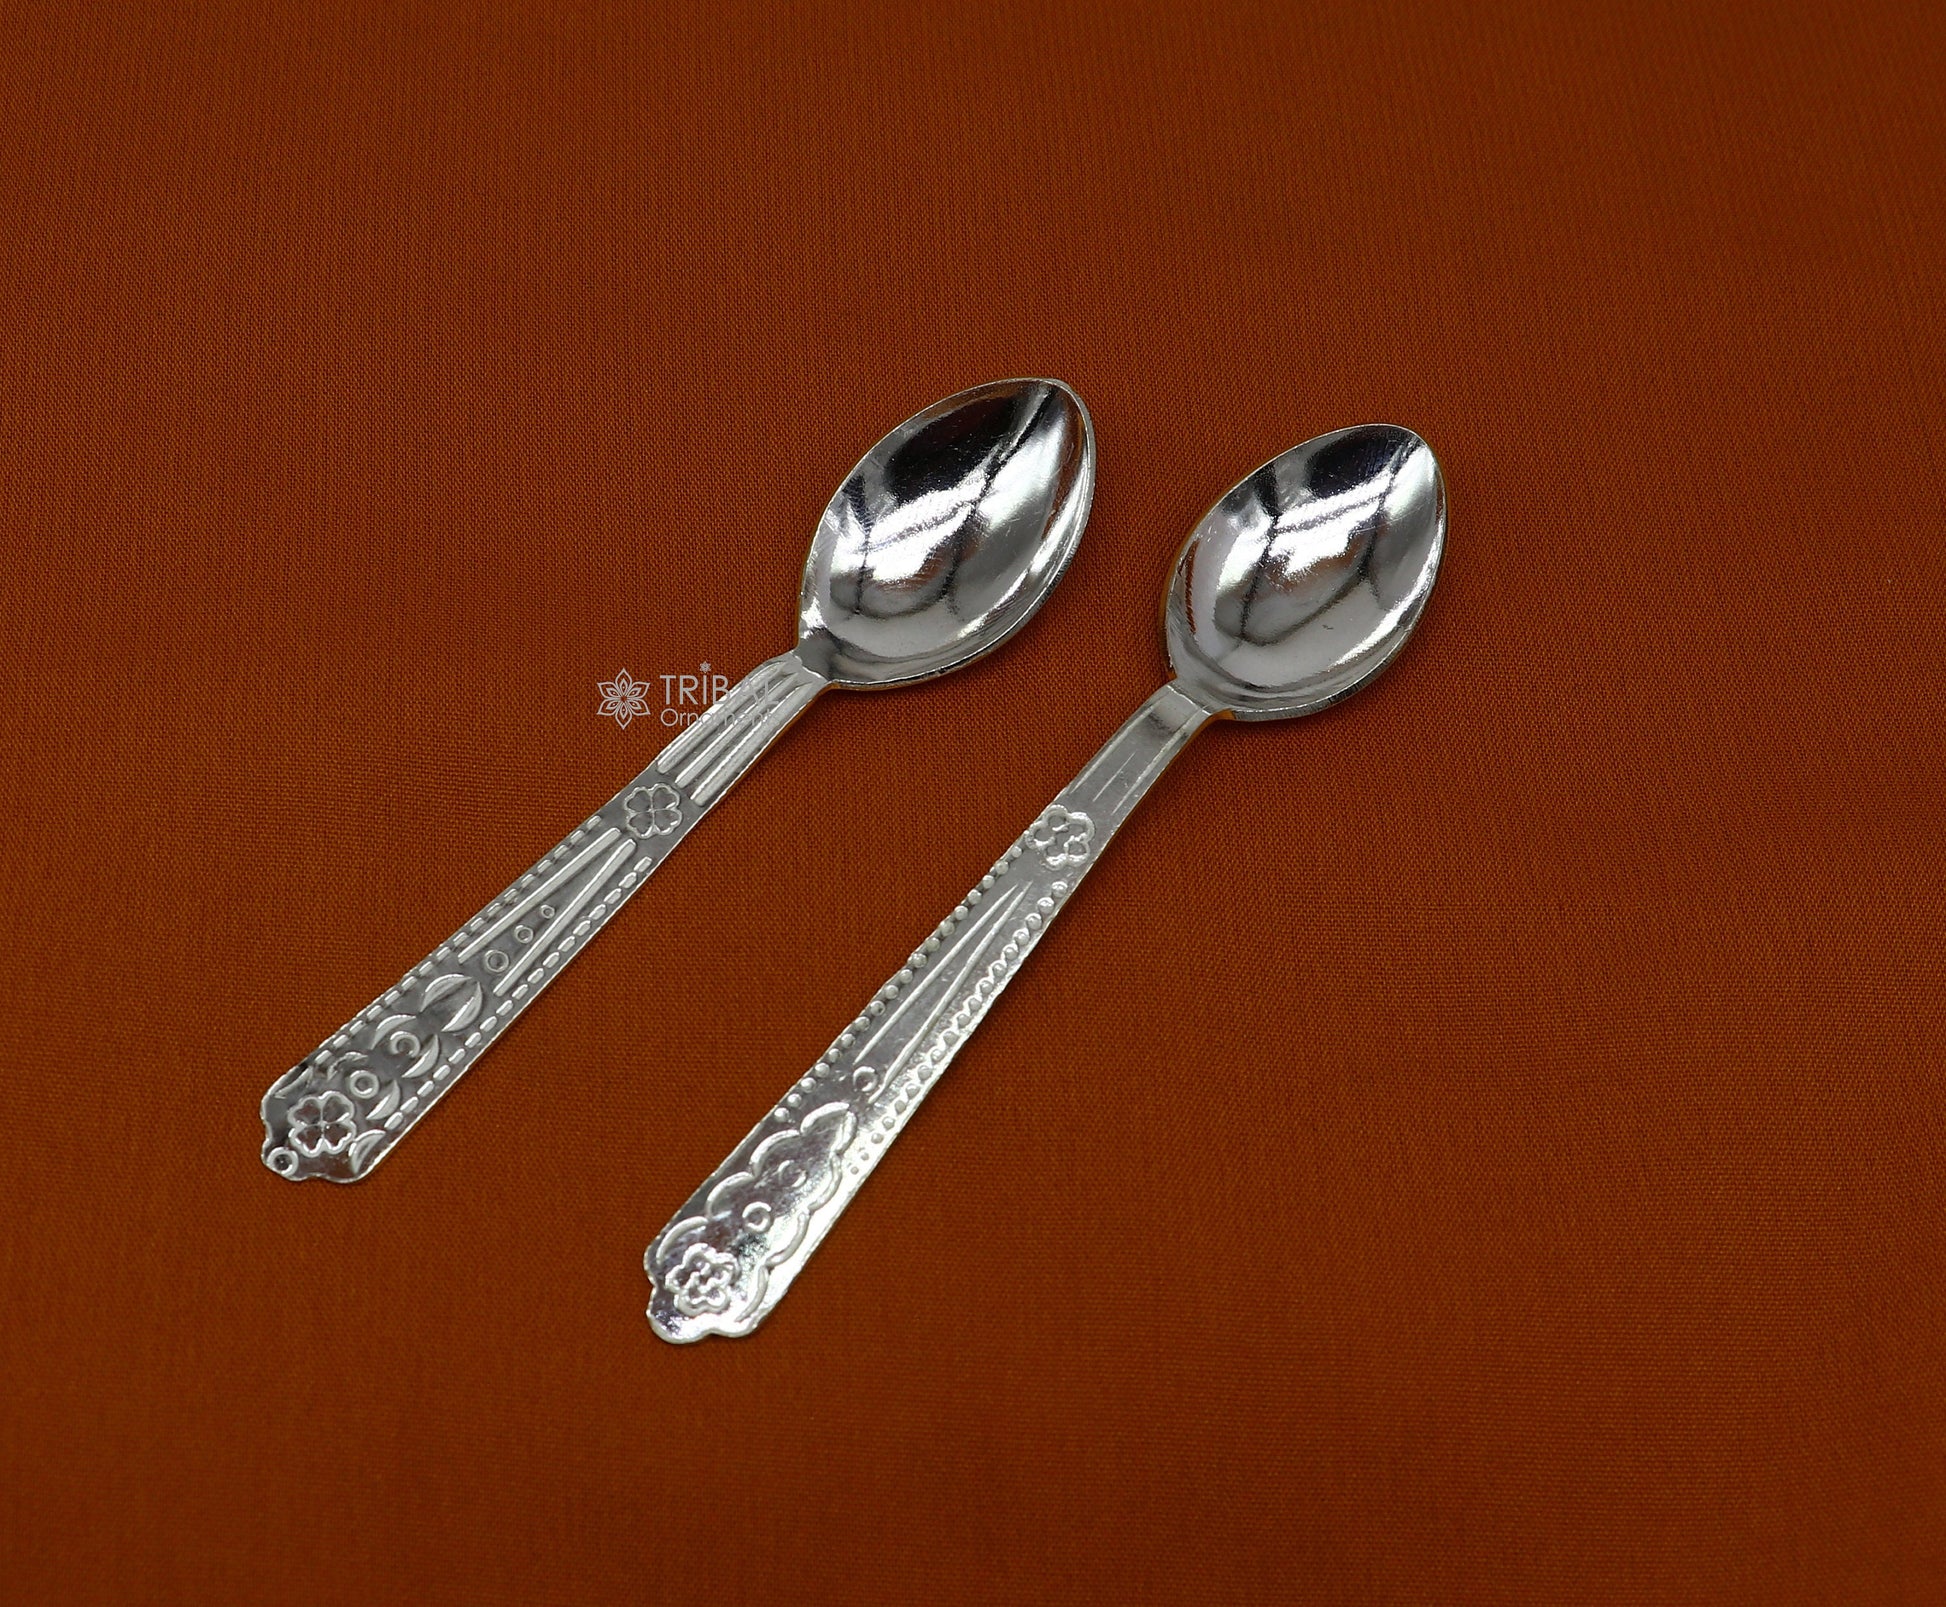 925 sterling silver handmade solid silver spoon for new born baby serving, silver has antibacterial properties, keep stay healthy sv282 - TRIBAL ORNAMENTS